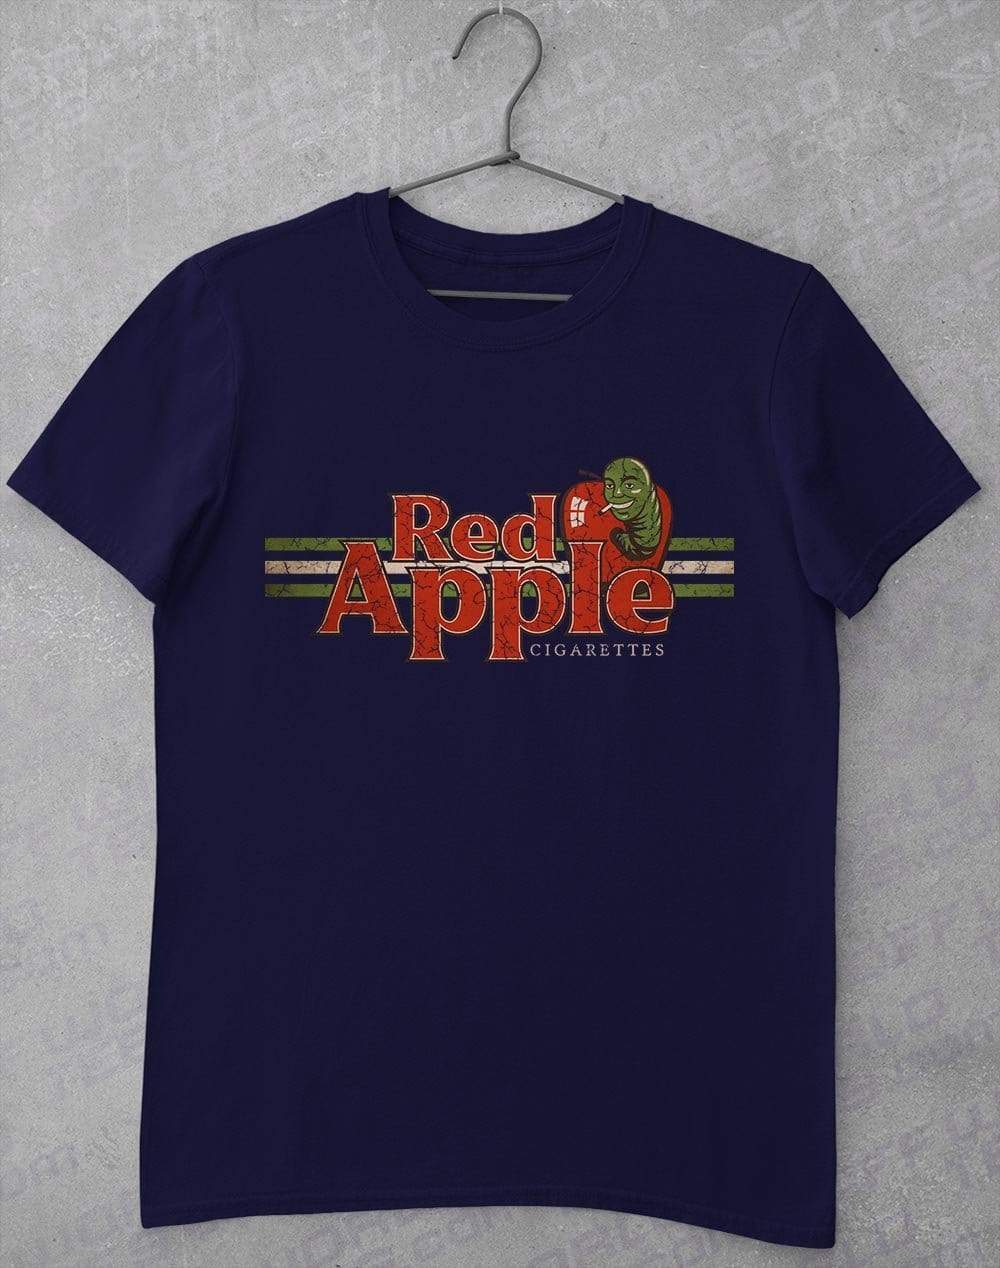 Red Apple Cigarettes T-Shirt S / Navy  - Off World Tees